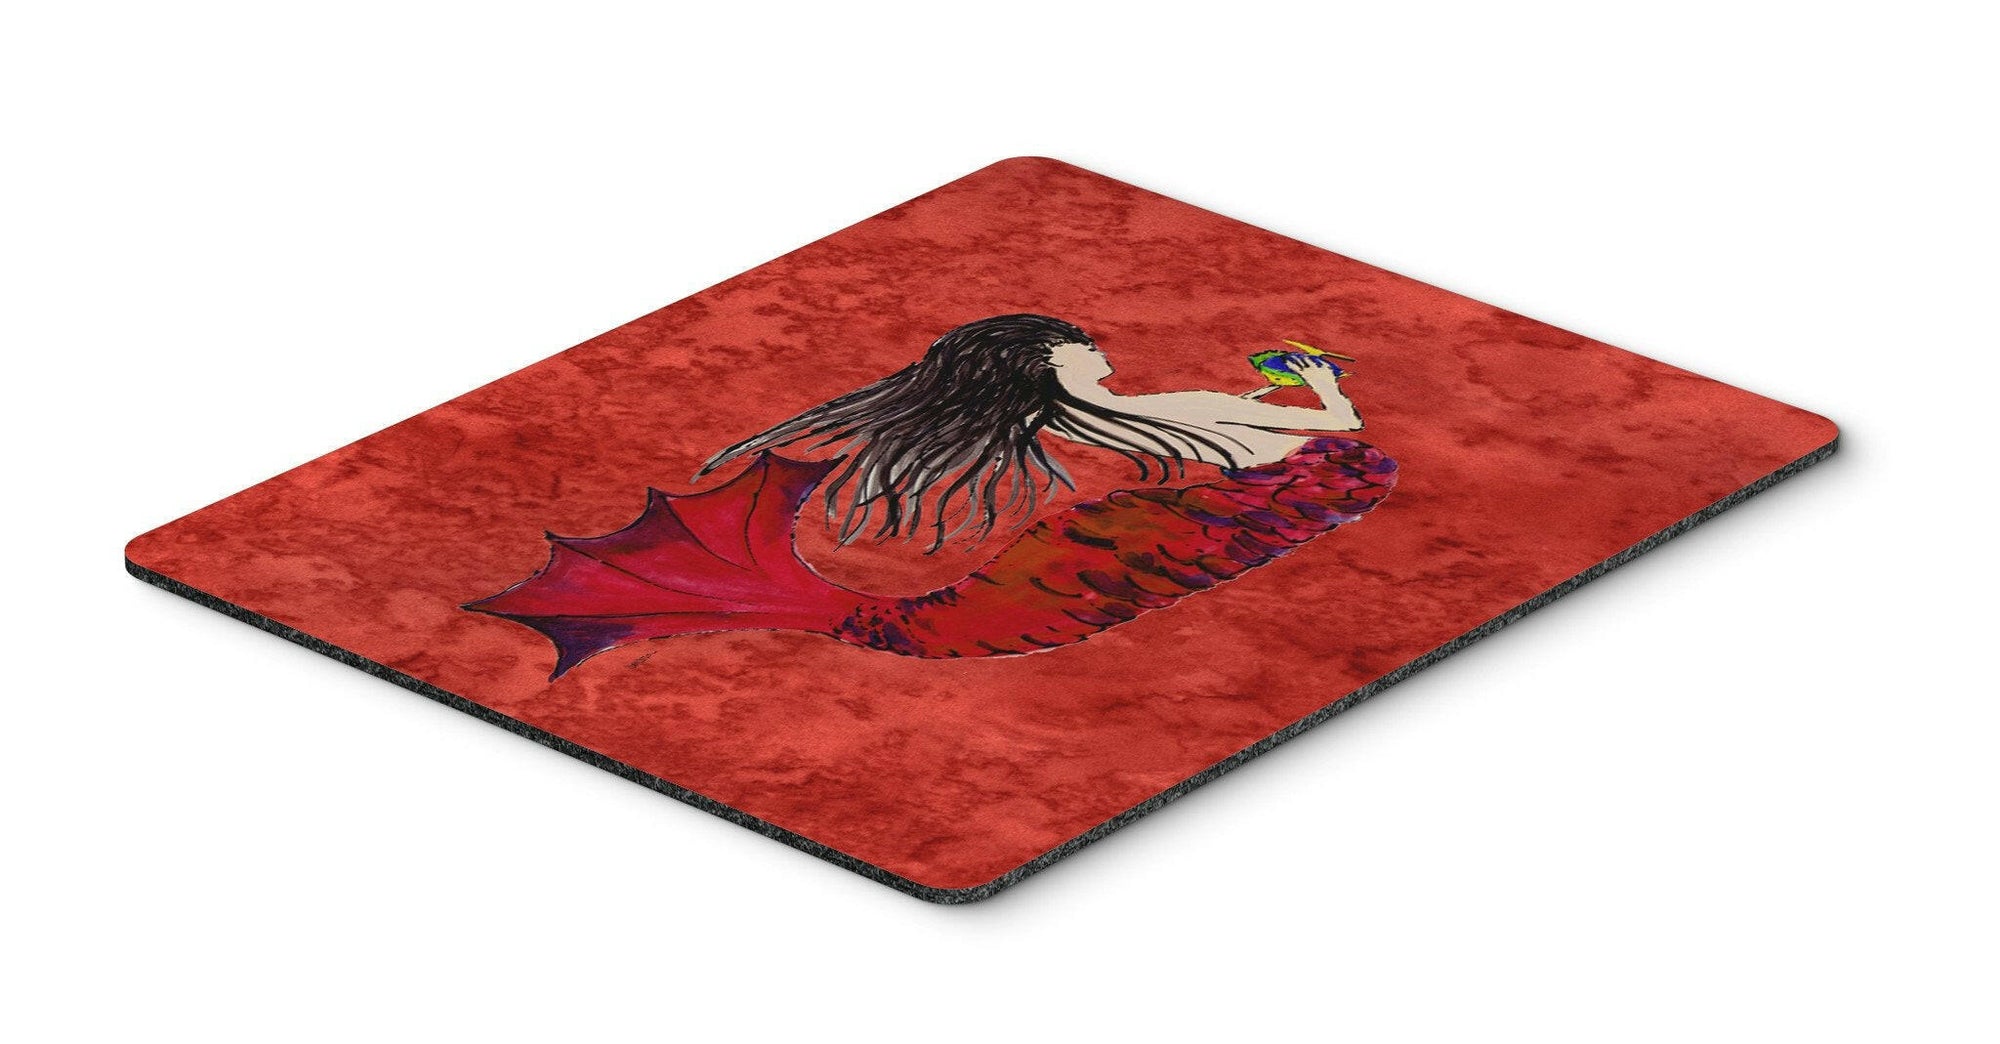 Black Haired Mermaid on Red Mouse Pad, Hot Pad or Trivet 8726MP by Caroline's Treasures